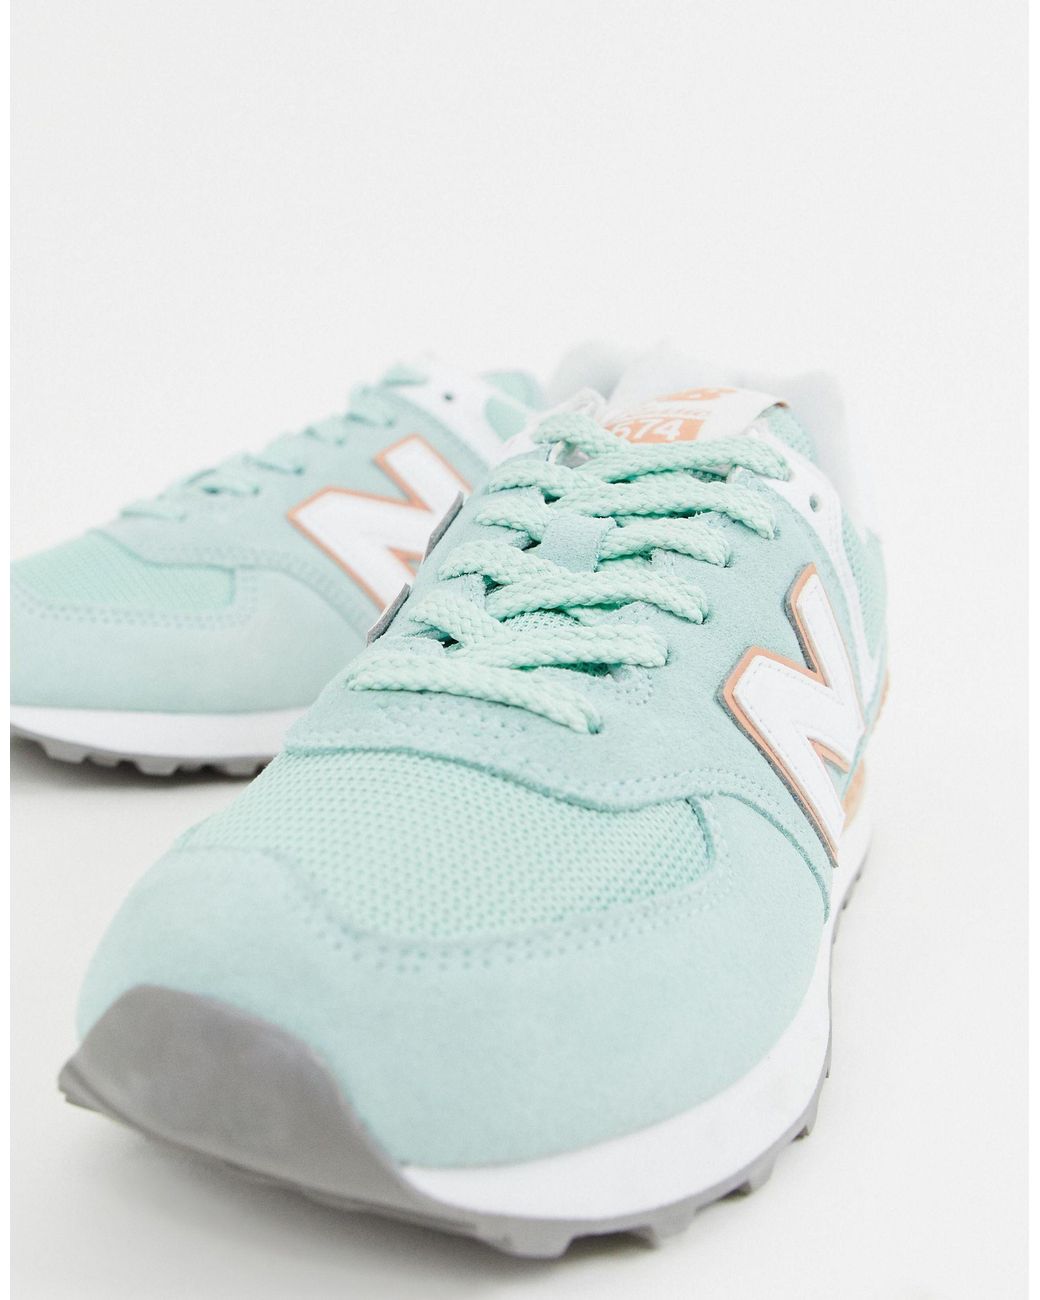 New Balance 574 V2 Pastel Mint Sneakers in Green | Lyst